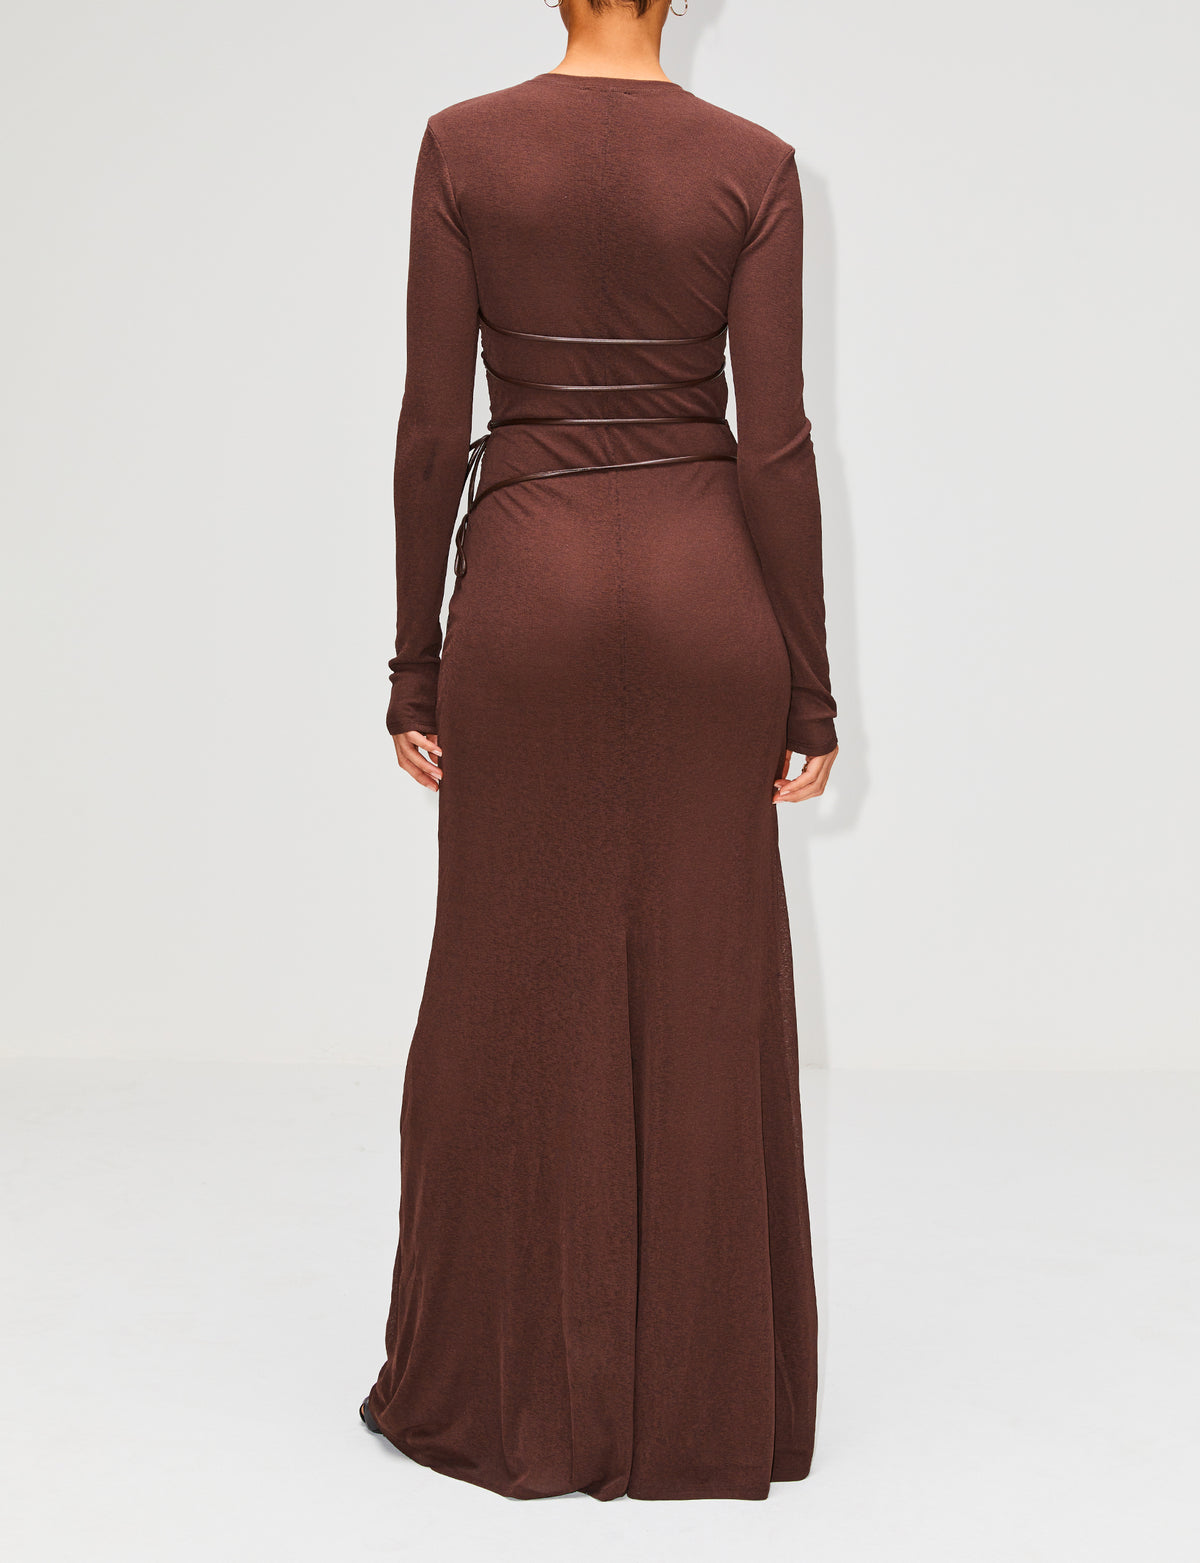 view 4 - Marghe Solid Mesh Jersey Dress